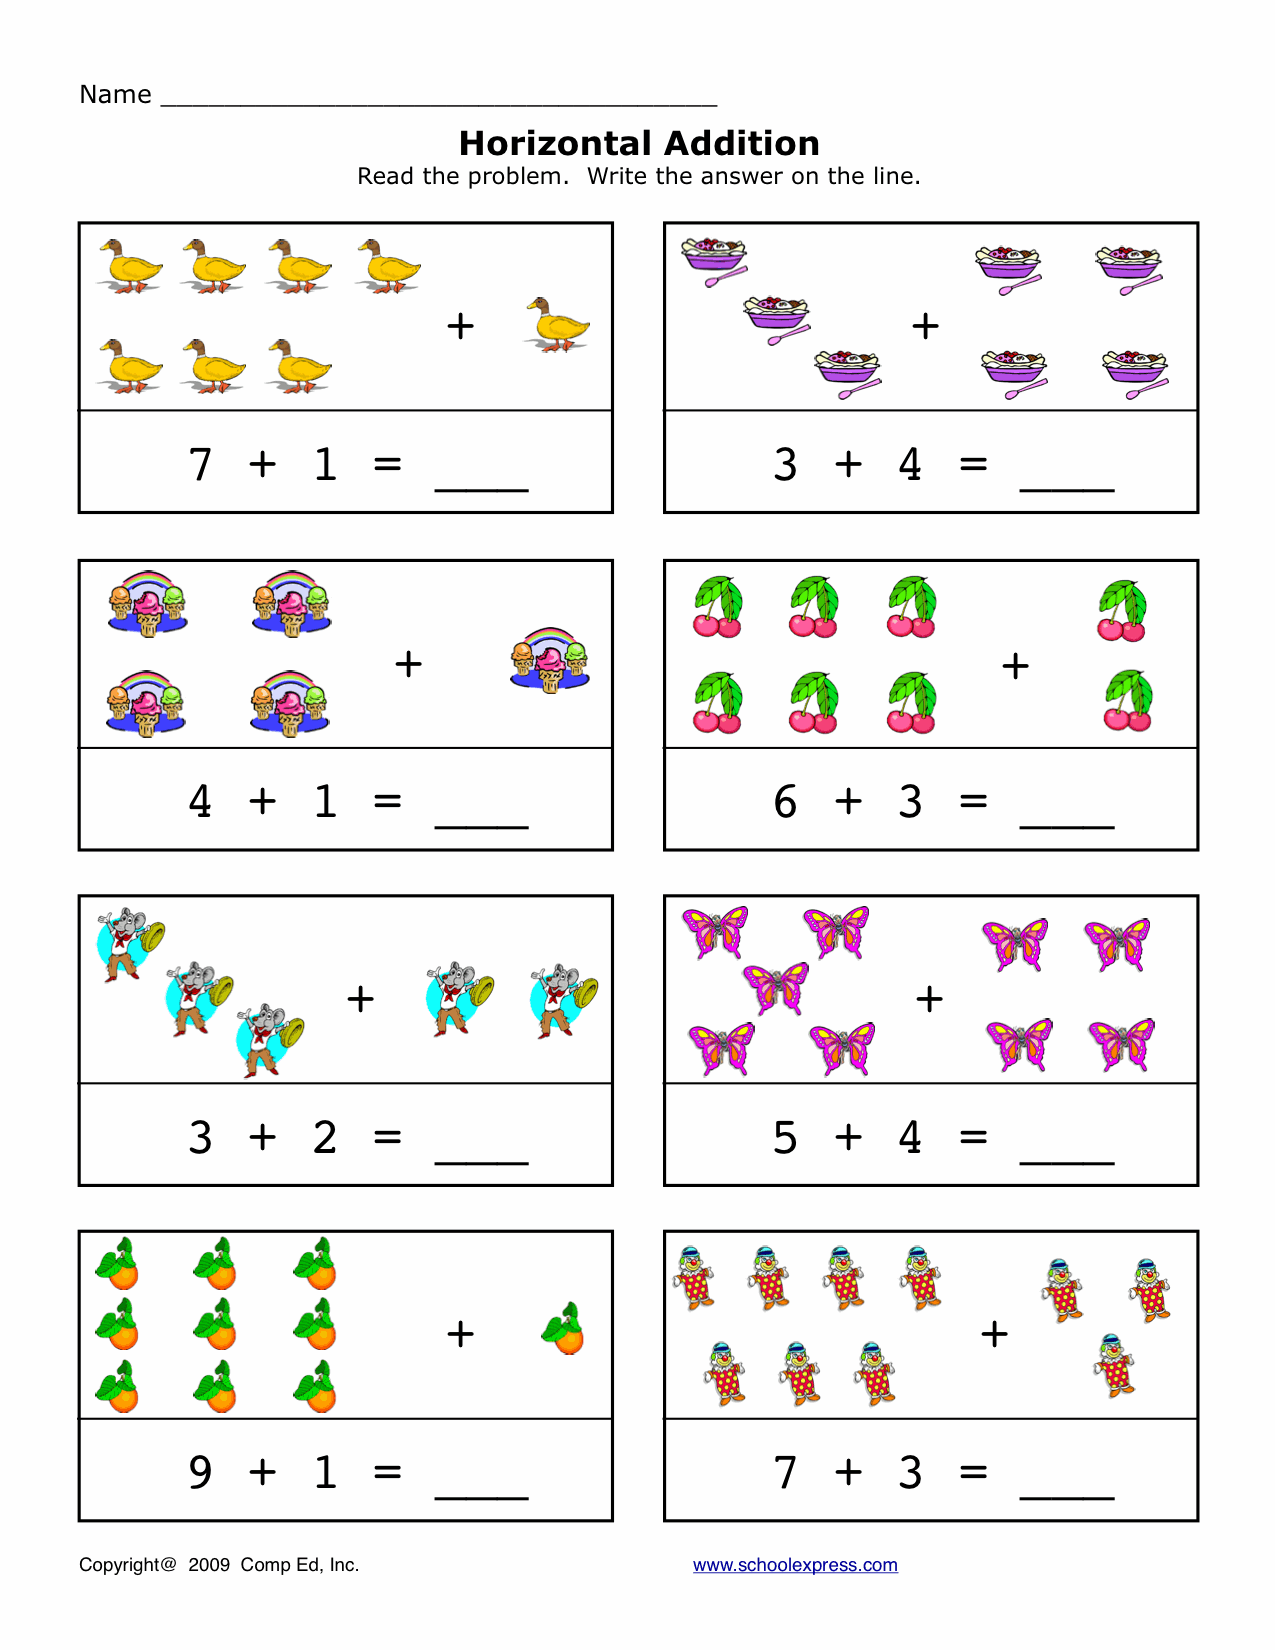 19000+ FREE worksheets, create your own worksheets, games